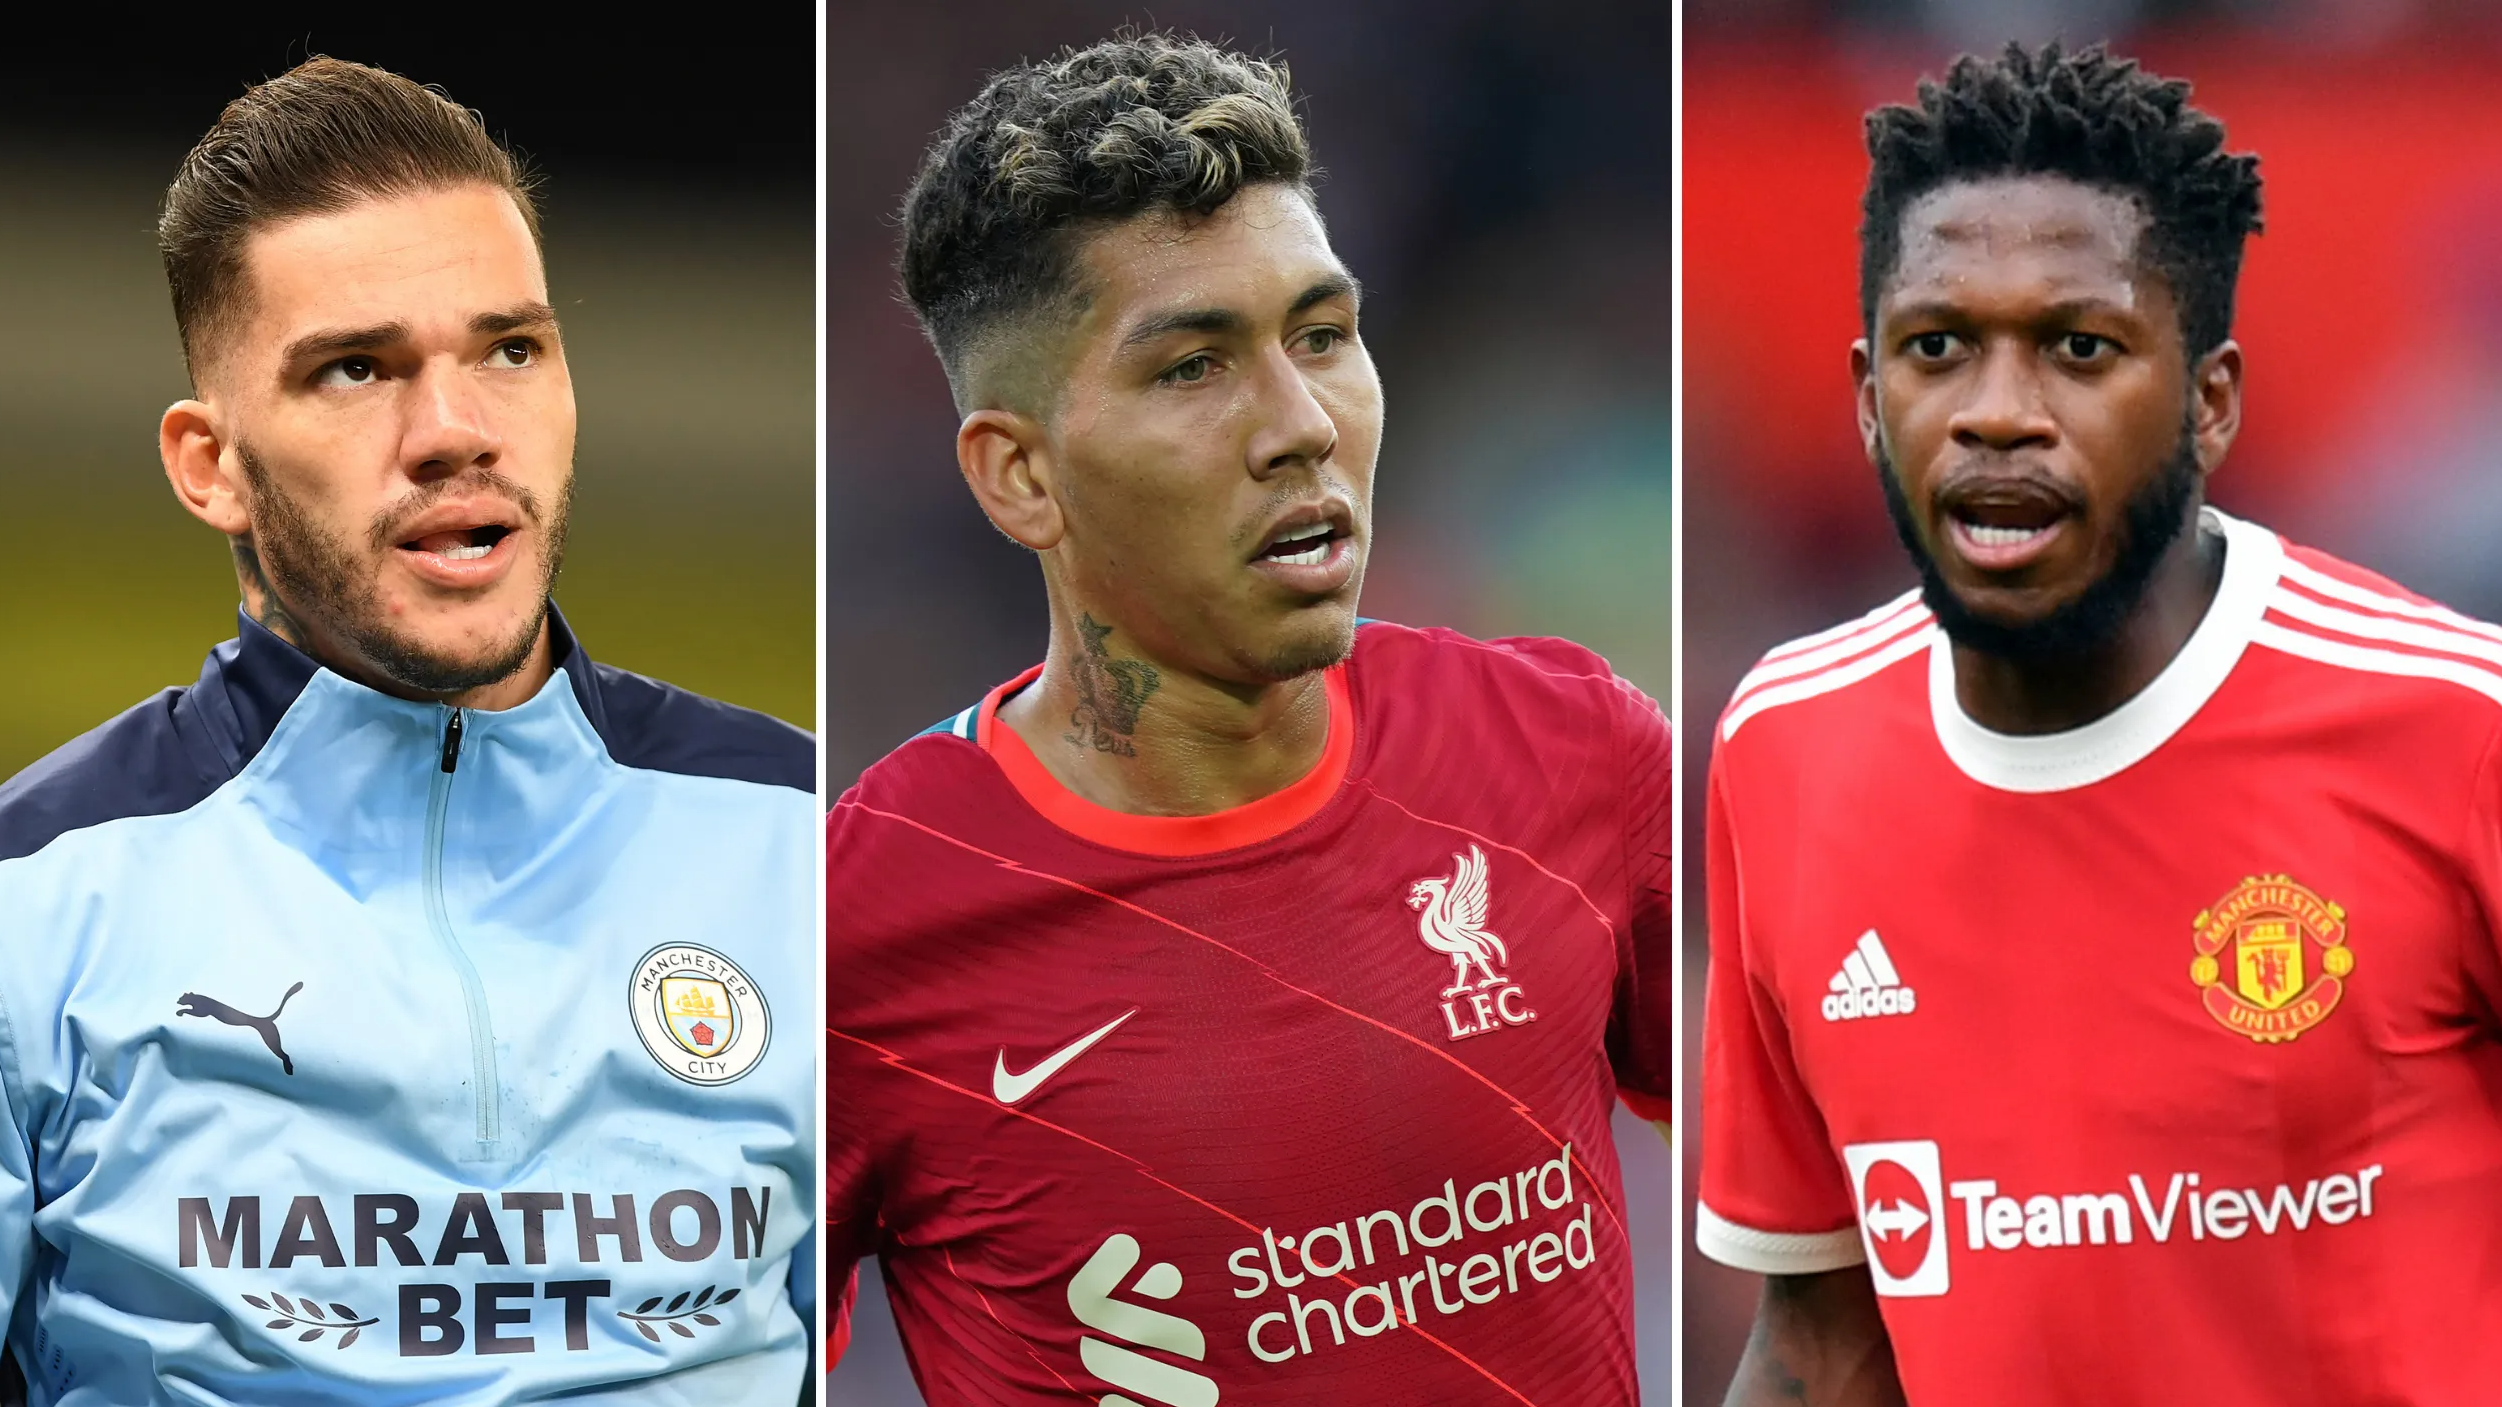 Brazil Call Up Eight Premier League Players For World Cup